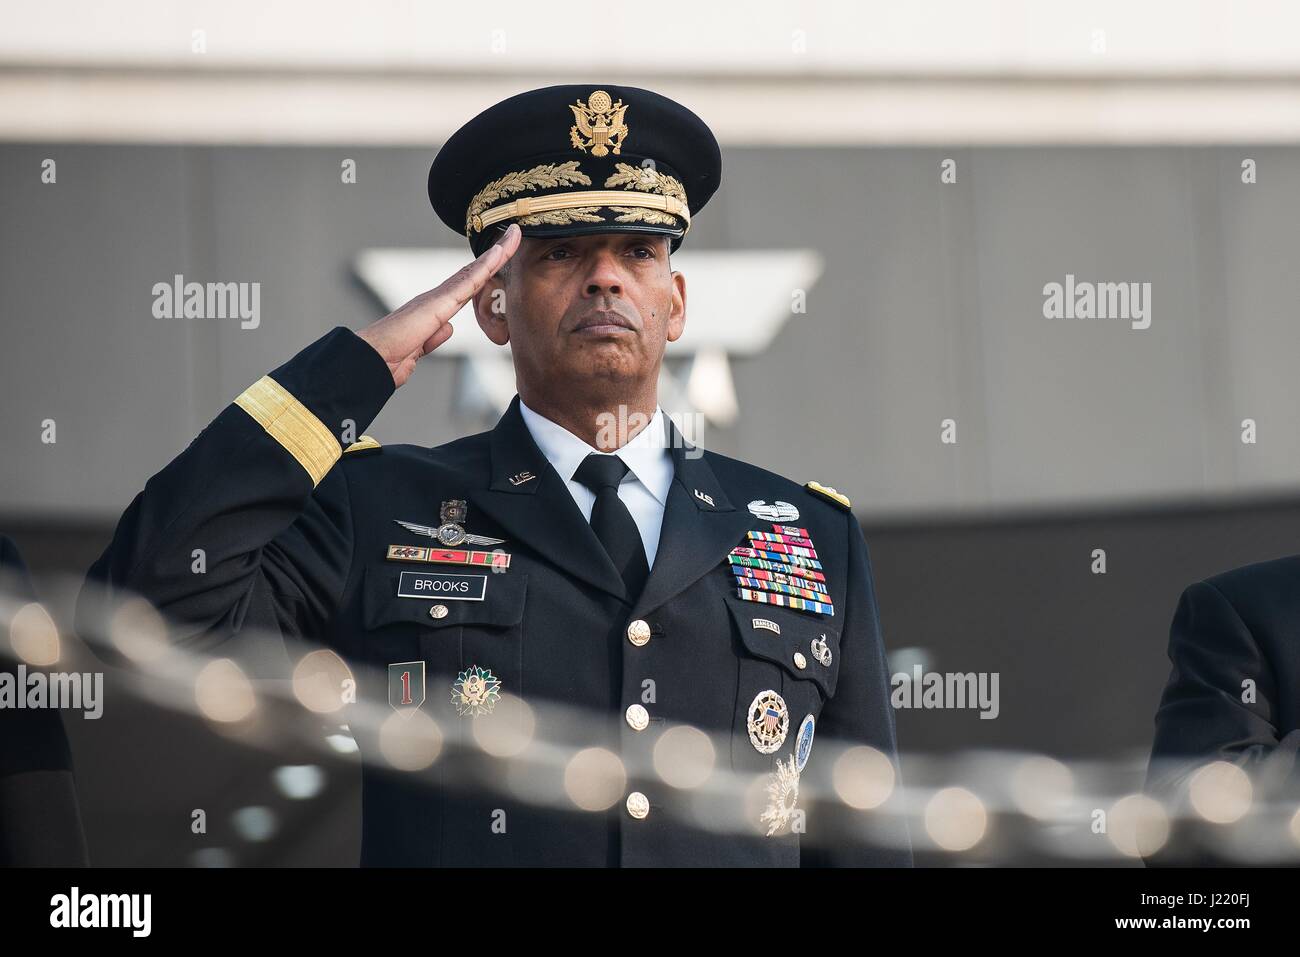 U.S. Forces Korea Army Commander Vincent Brooks renders honors during an honor guard ceremony at the Ministry of National Defense February 3, 2017 in Seoul, South Korea.     (photo by Amber I. Smith/DoD via Planetpix) Stock Photo